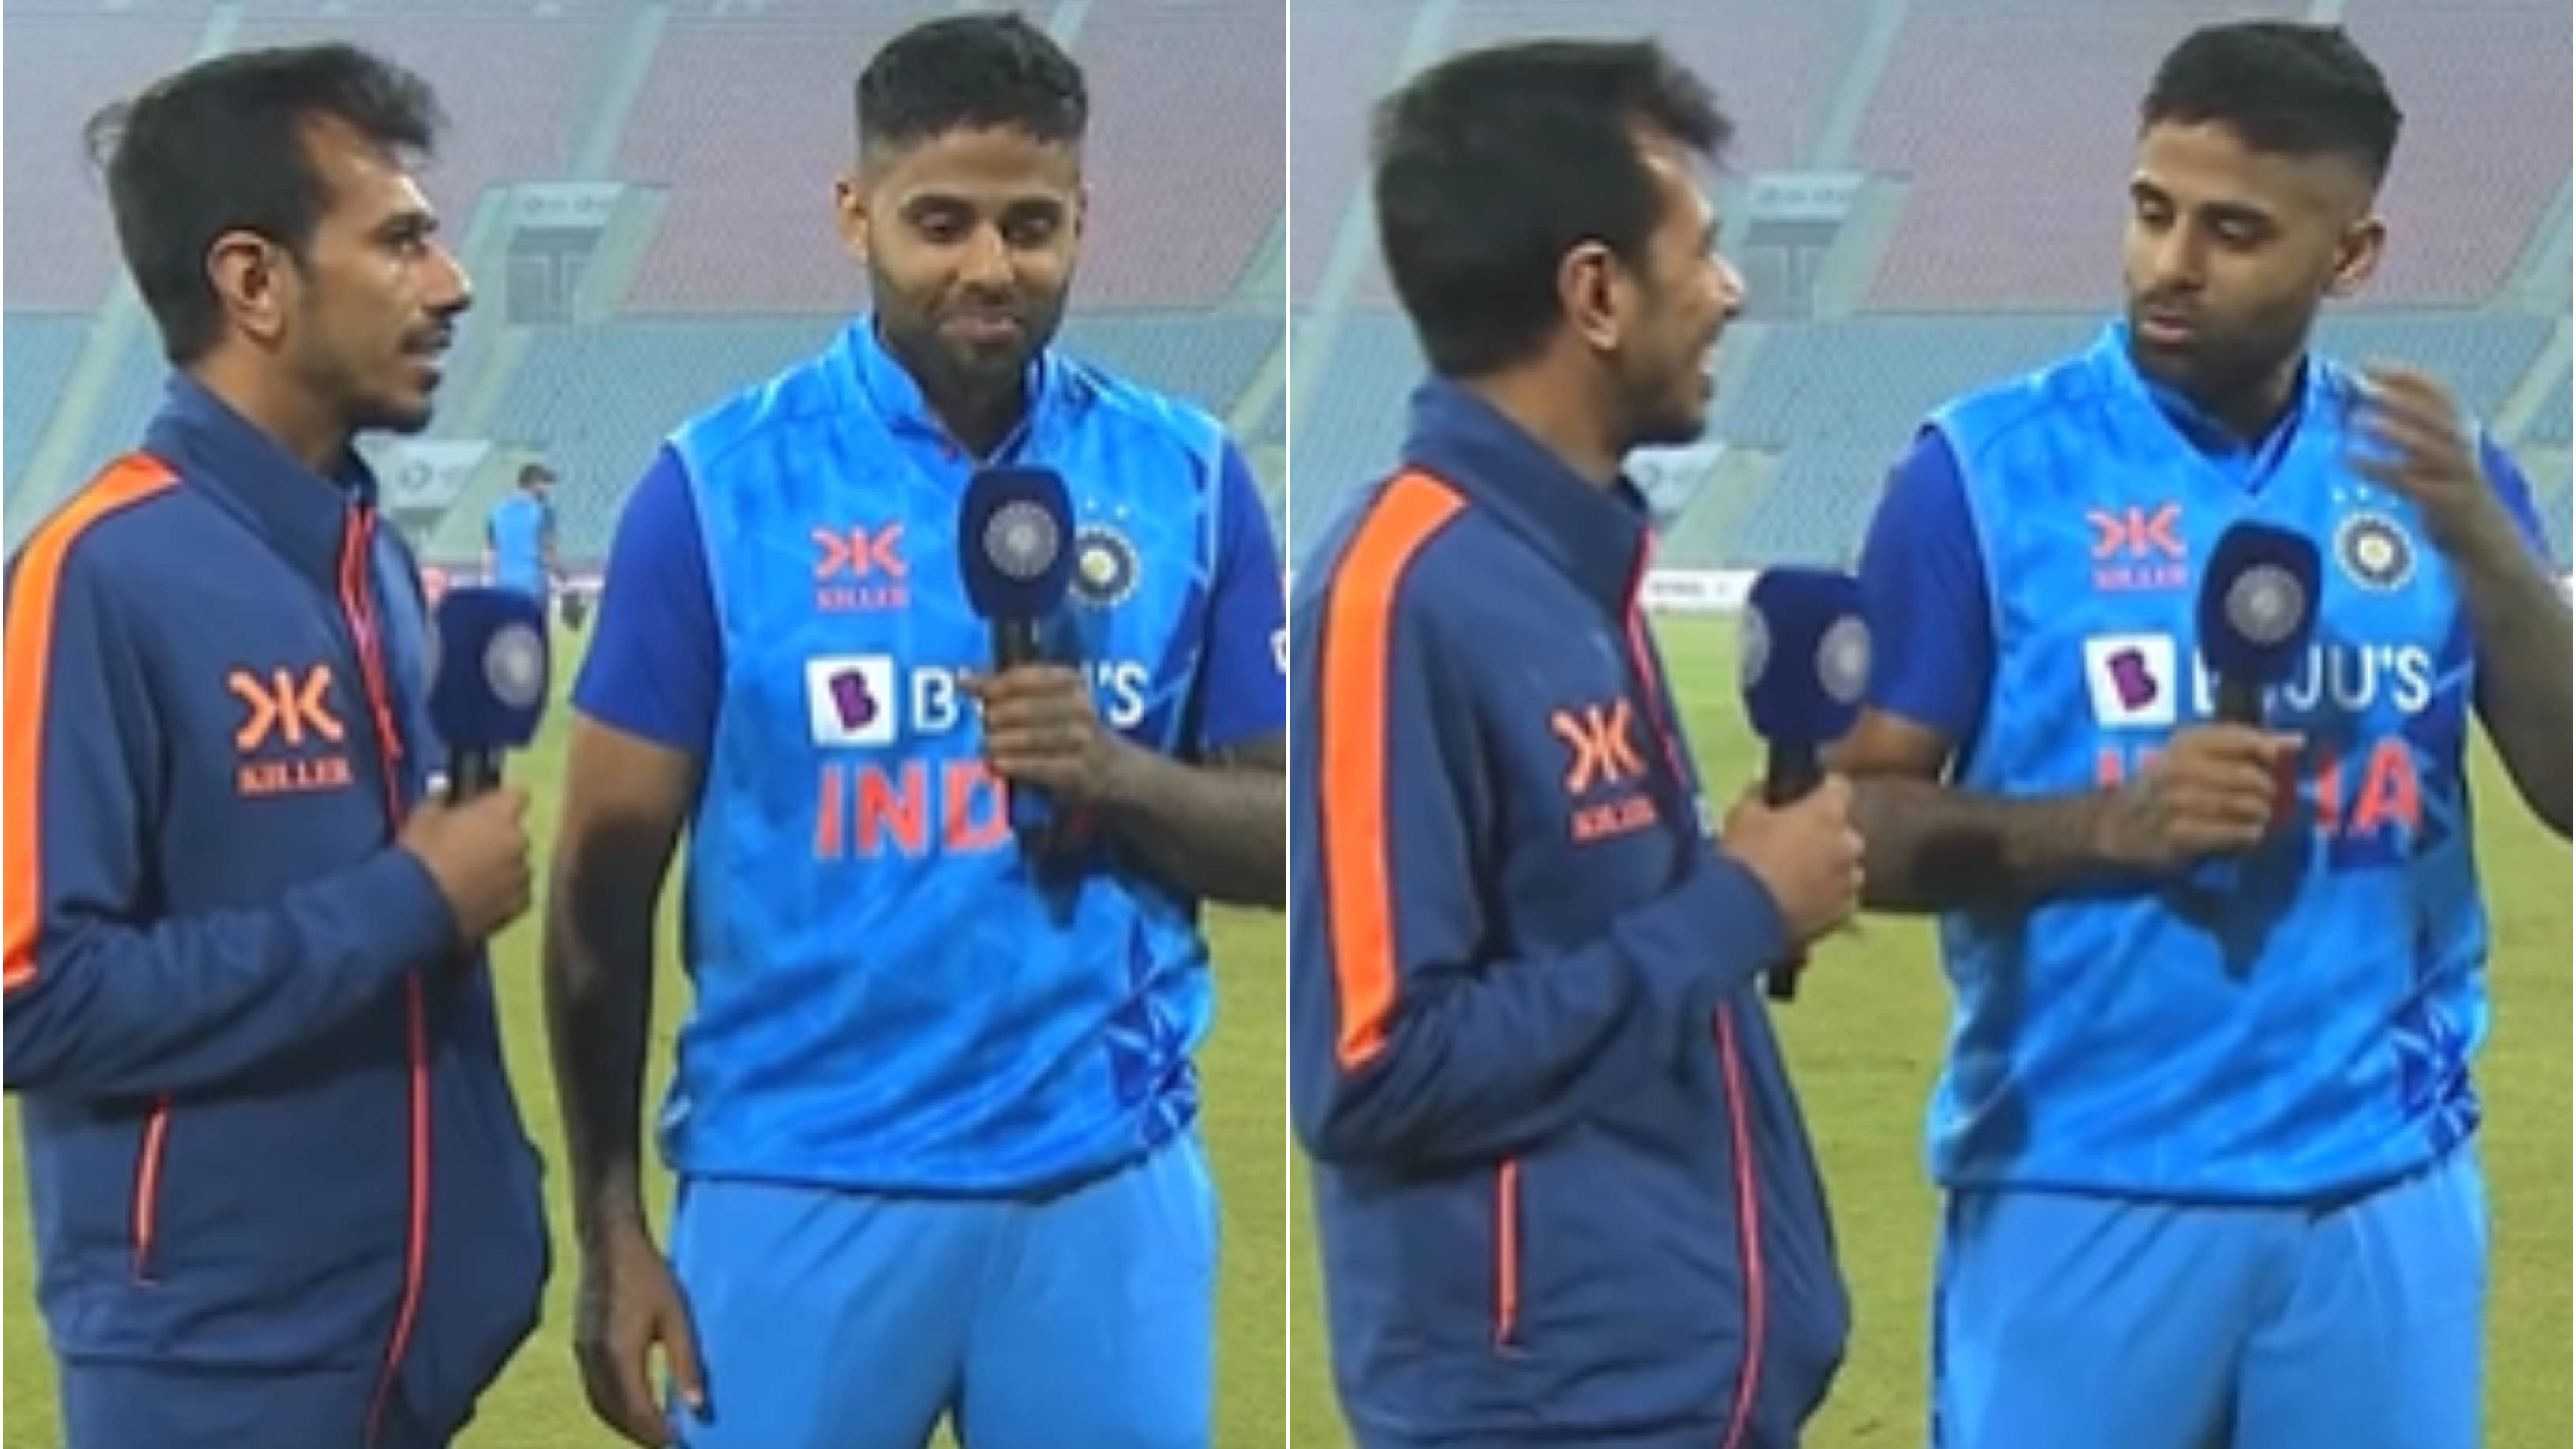 IND v NZ 2023: WATCH – “I am using your batting tips,” Suryakumar calls Chahal his batting coach after 2nd T20I win